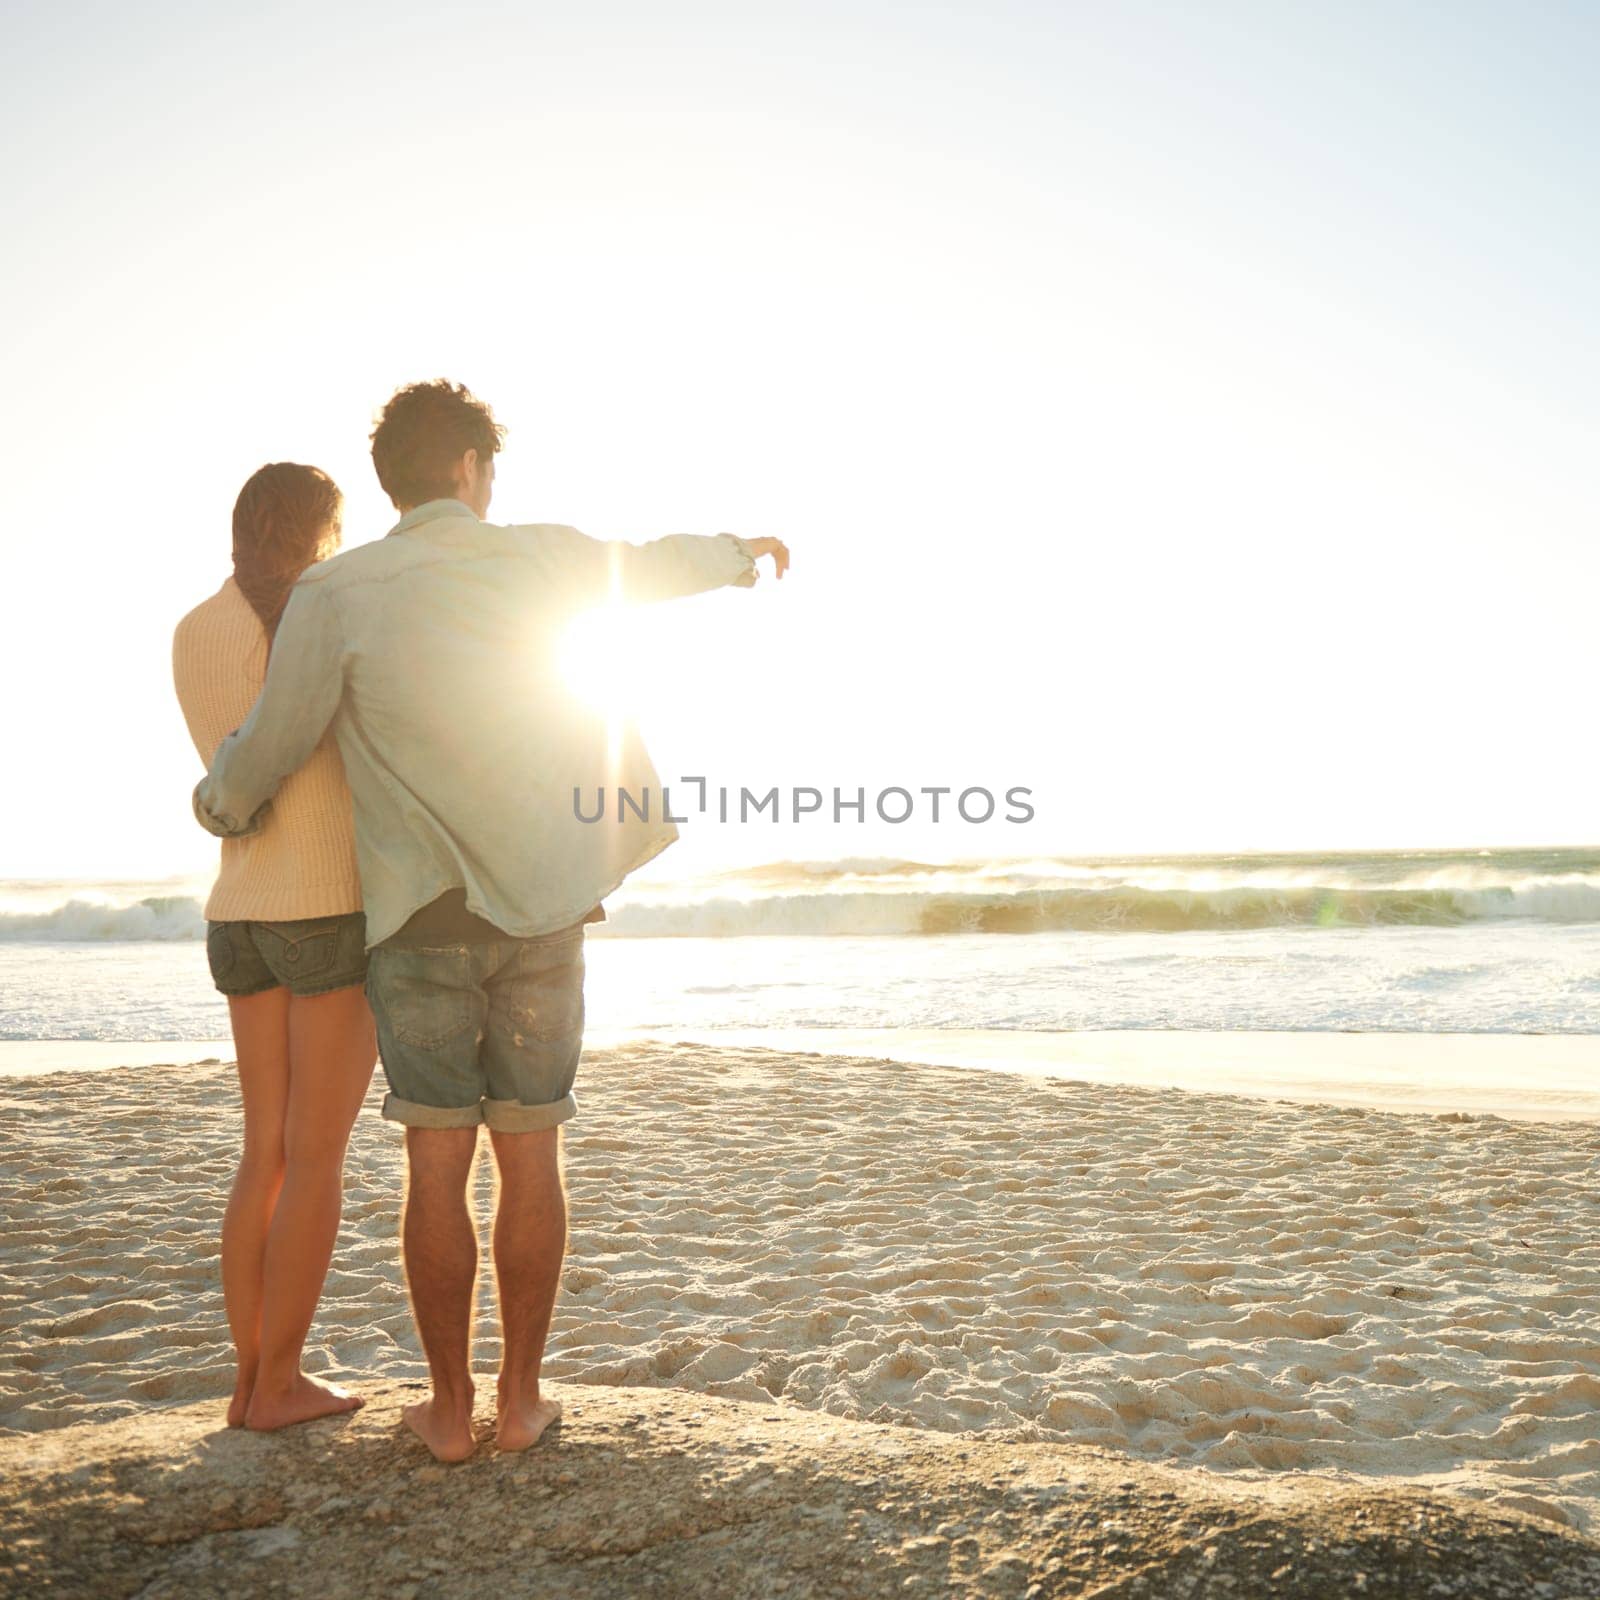 Beach sunset, hand pointing or couple in nature with hug, support or love. Summer, romance or back of people at sunrise with ocean view, conversation or adventure on vacation, holiday or Florida trip.